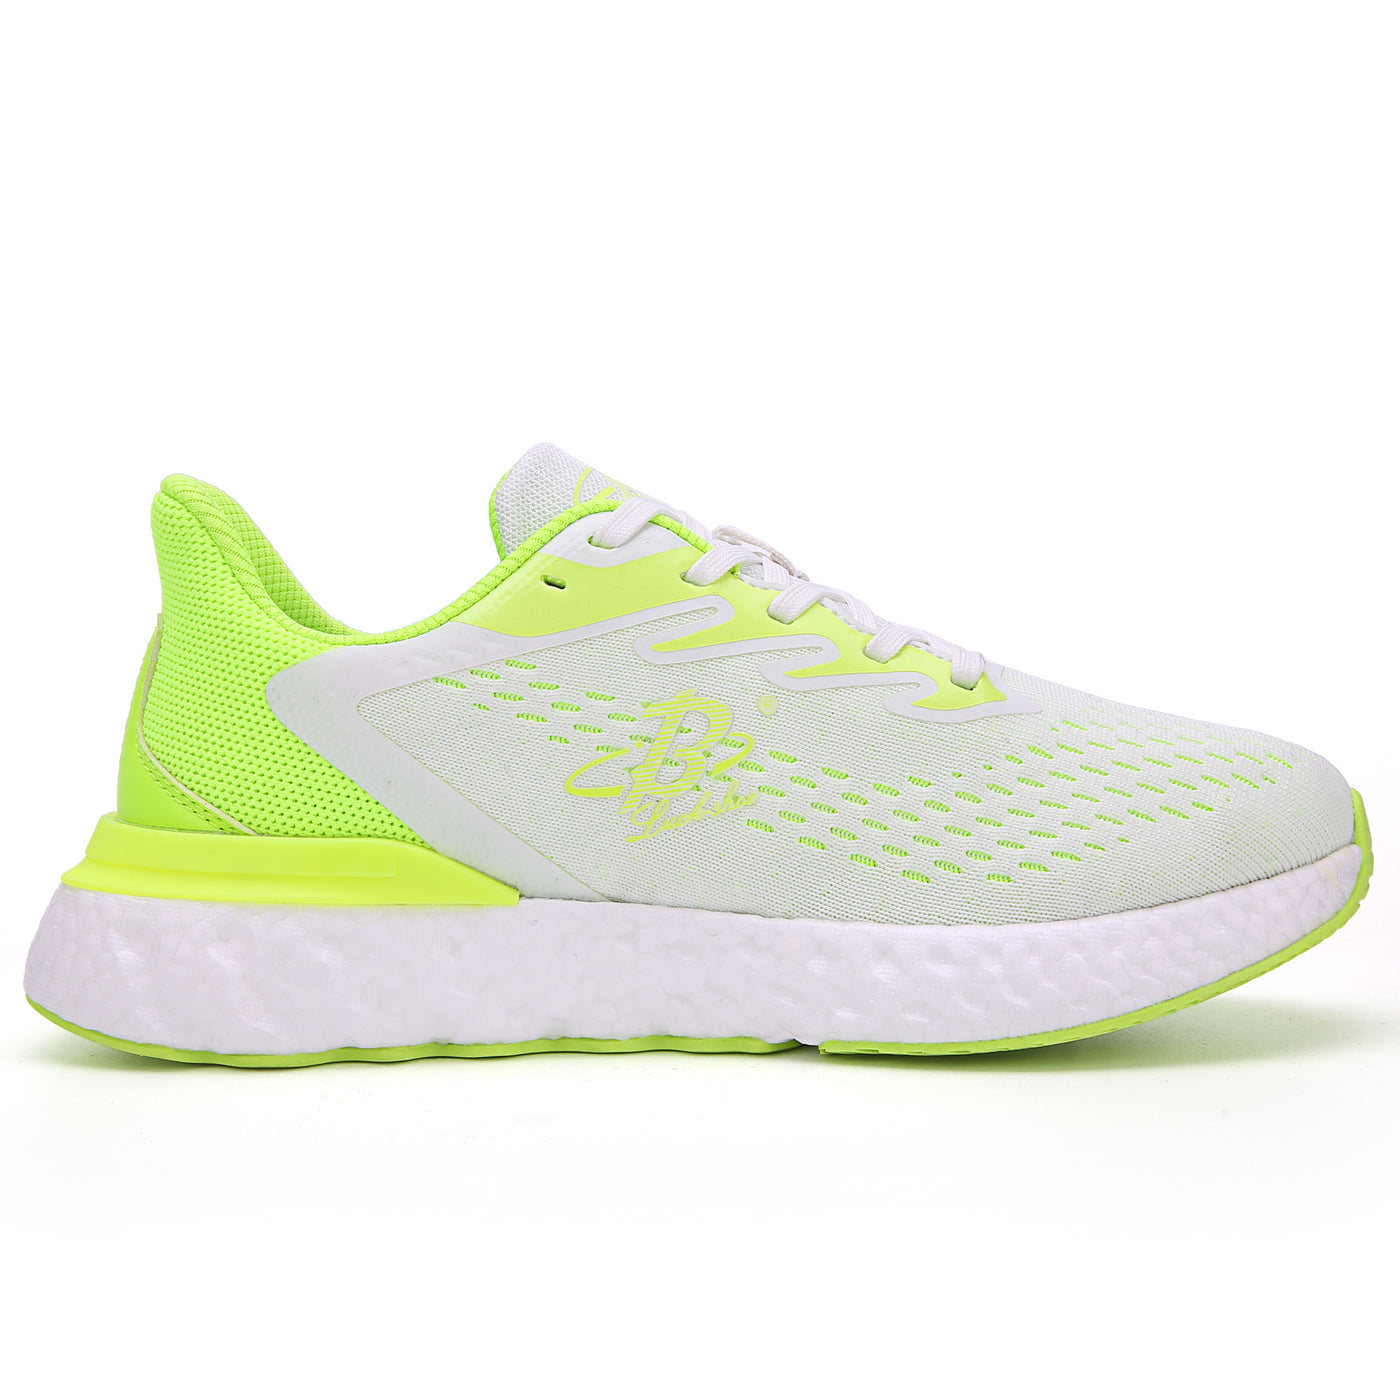 B LUCK SHOE Running Shoes, Unisex Breathable Flyknit Running Shoes with E-tpu Sole LS-288